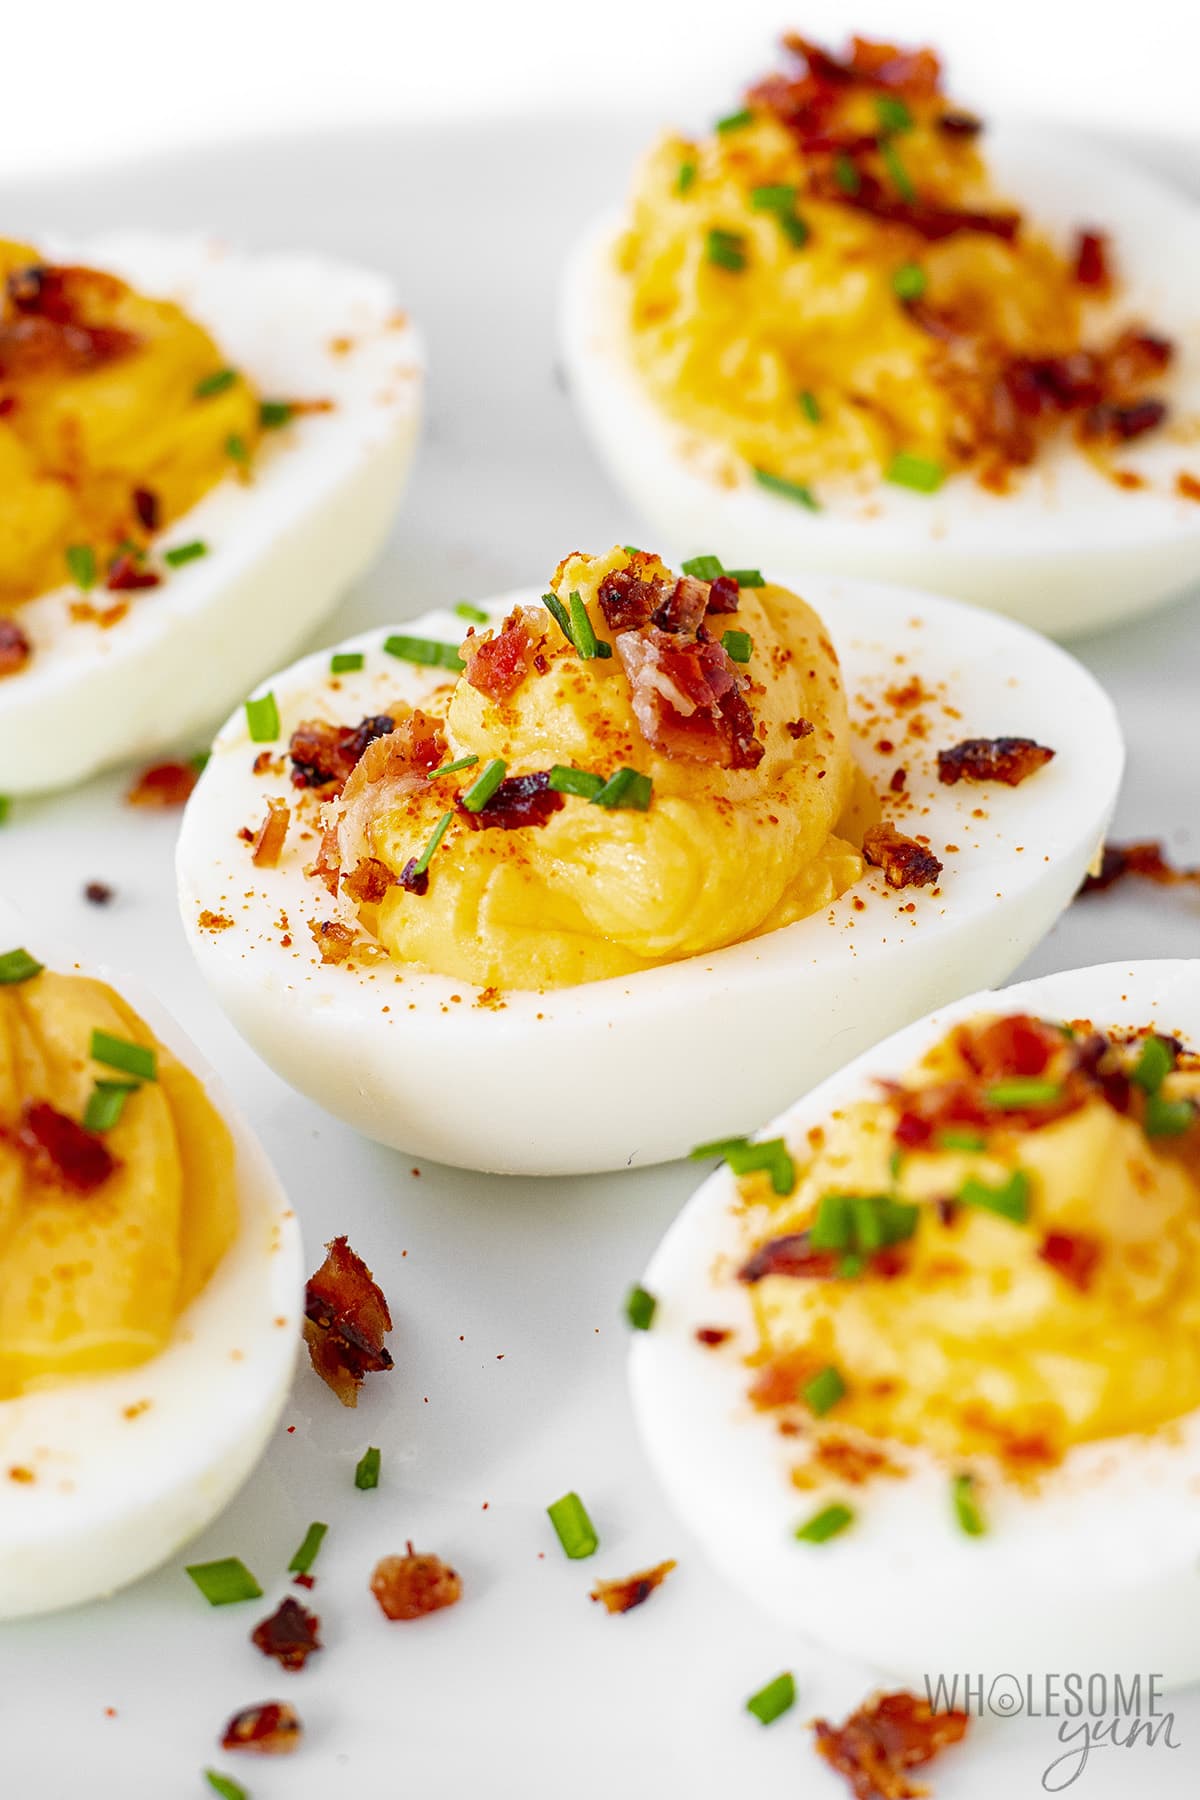 Deviled eggs on a plate with bacon bits and parsley.